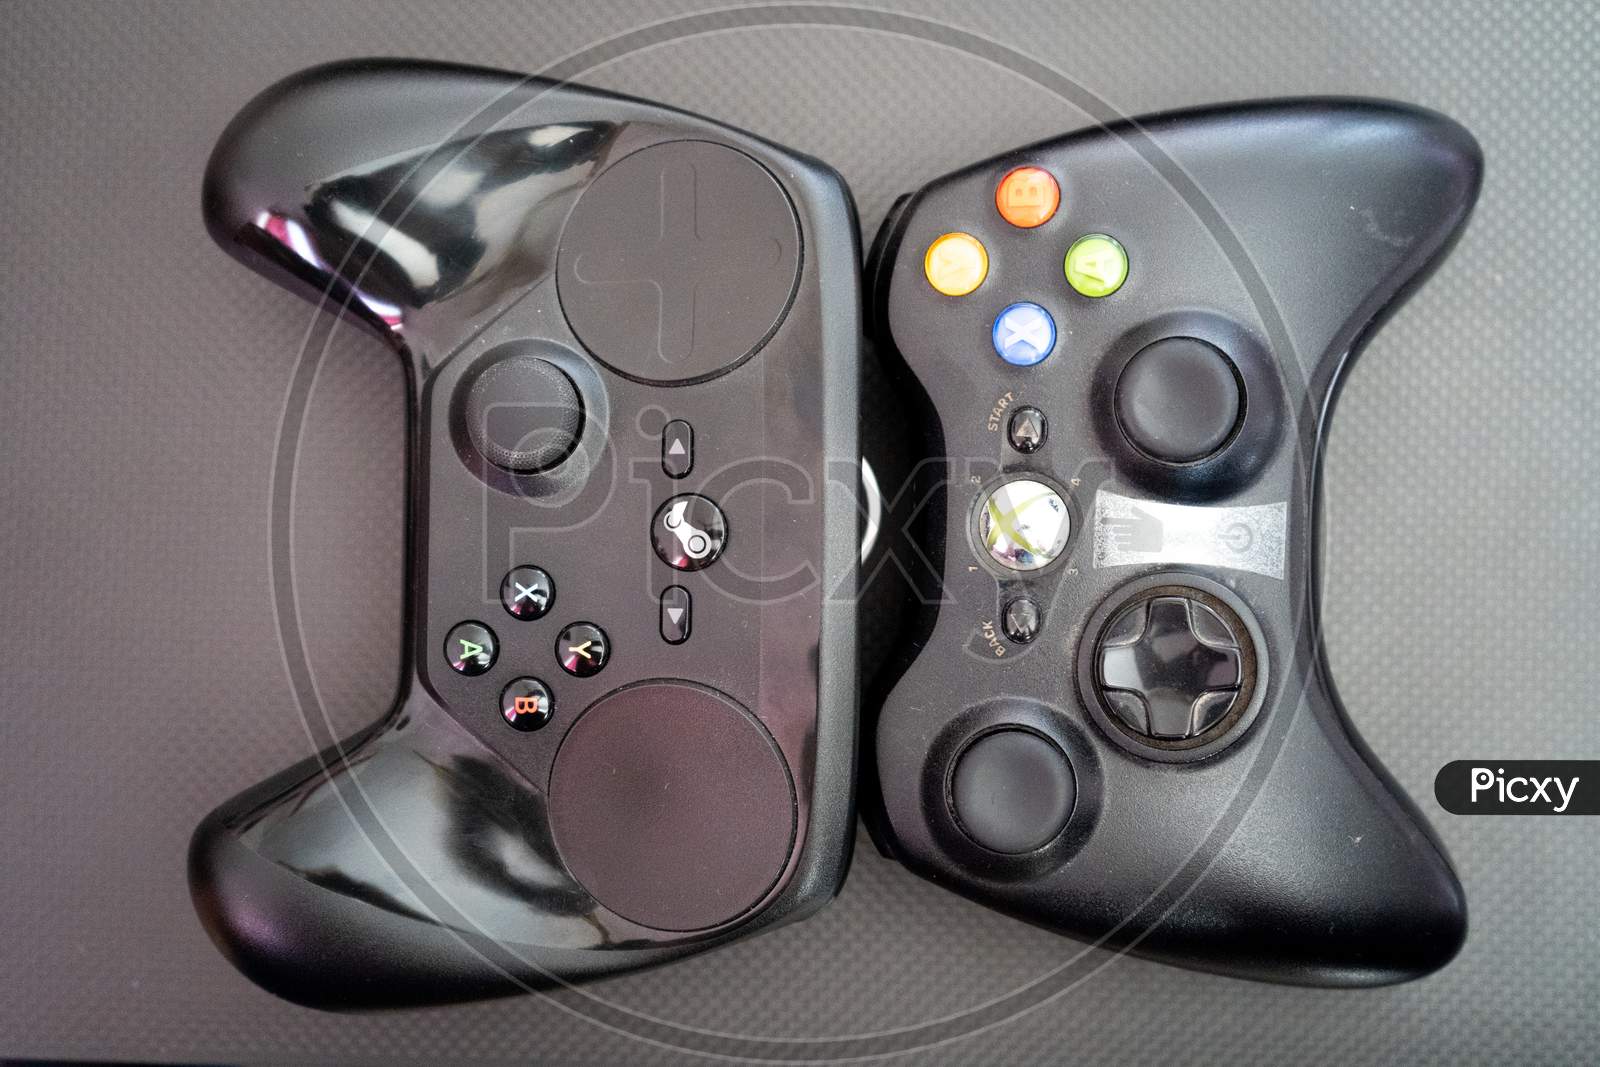 Xbox Vs The Steam Controller On A Carbon Fiber Background Showing Technology Of Inputs For Computer Gaming